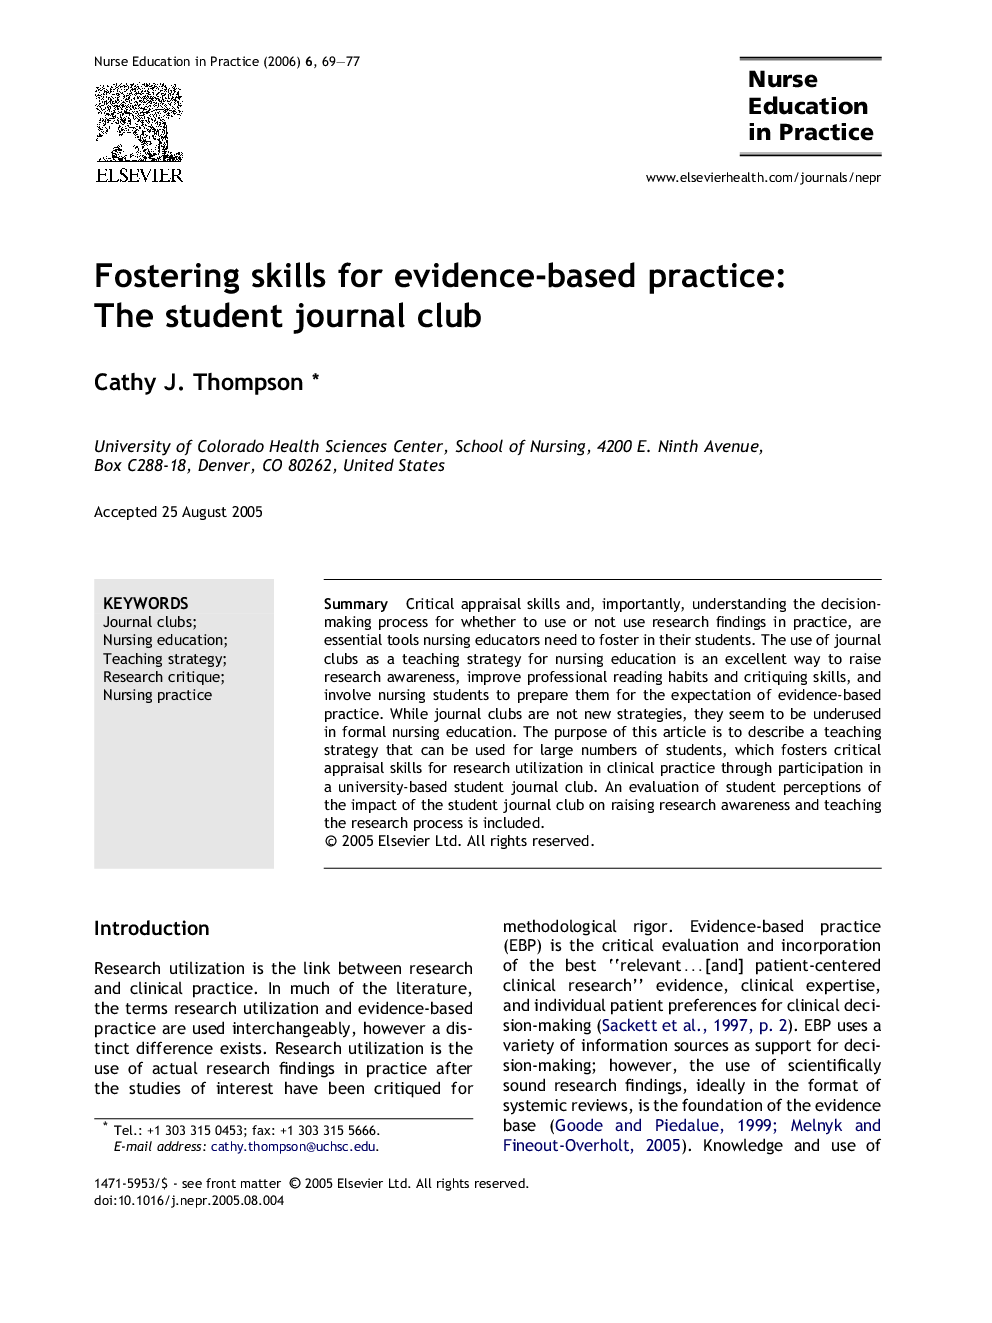 Fostering skills for evidence-based practice: The student journal club